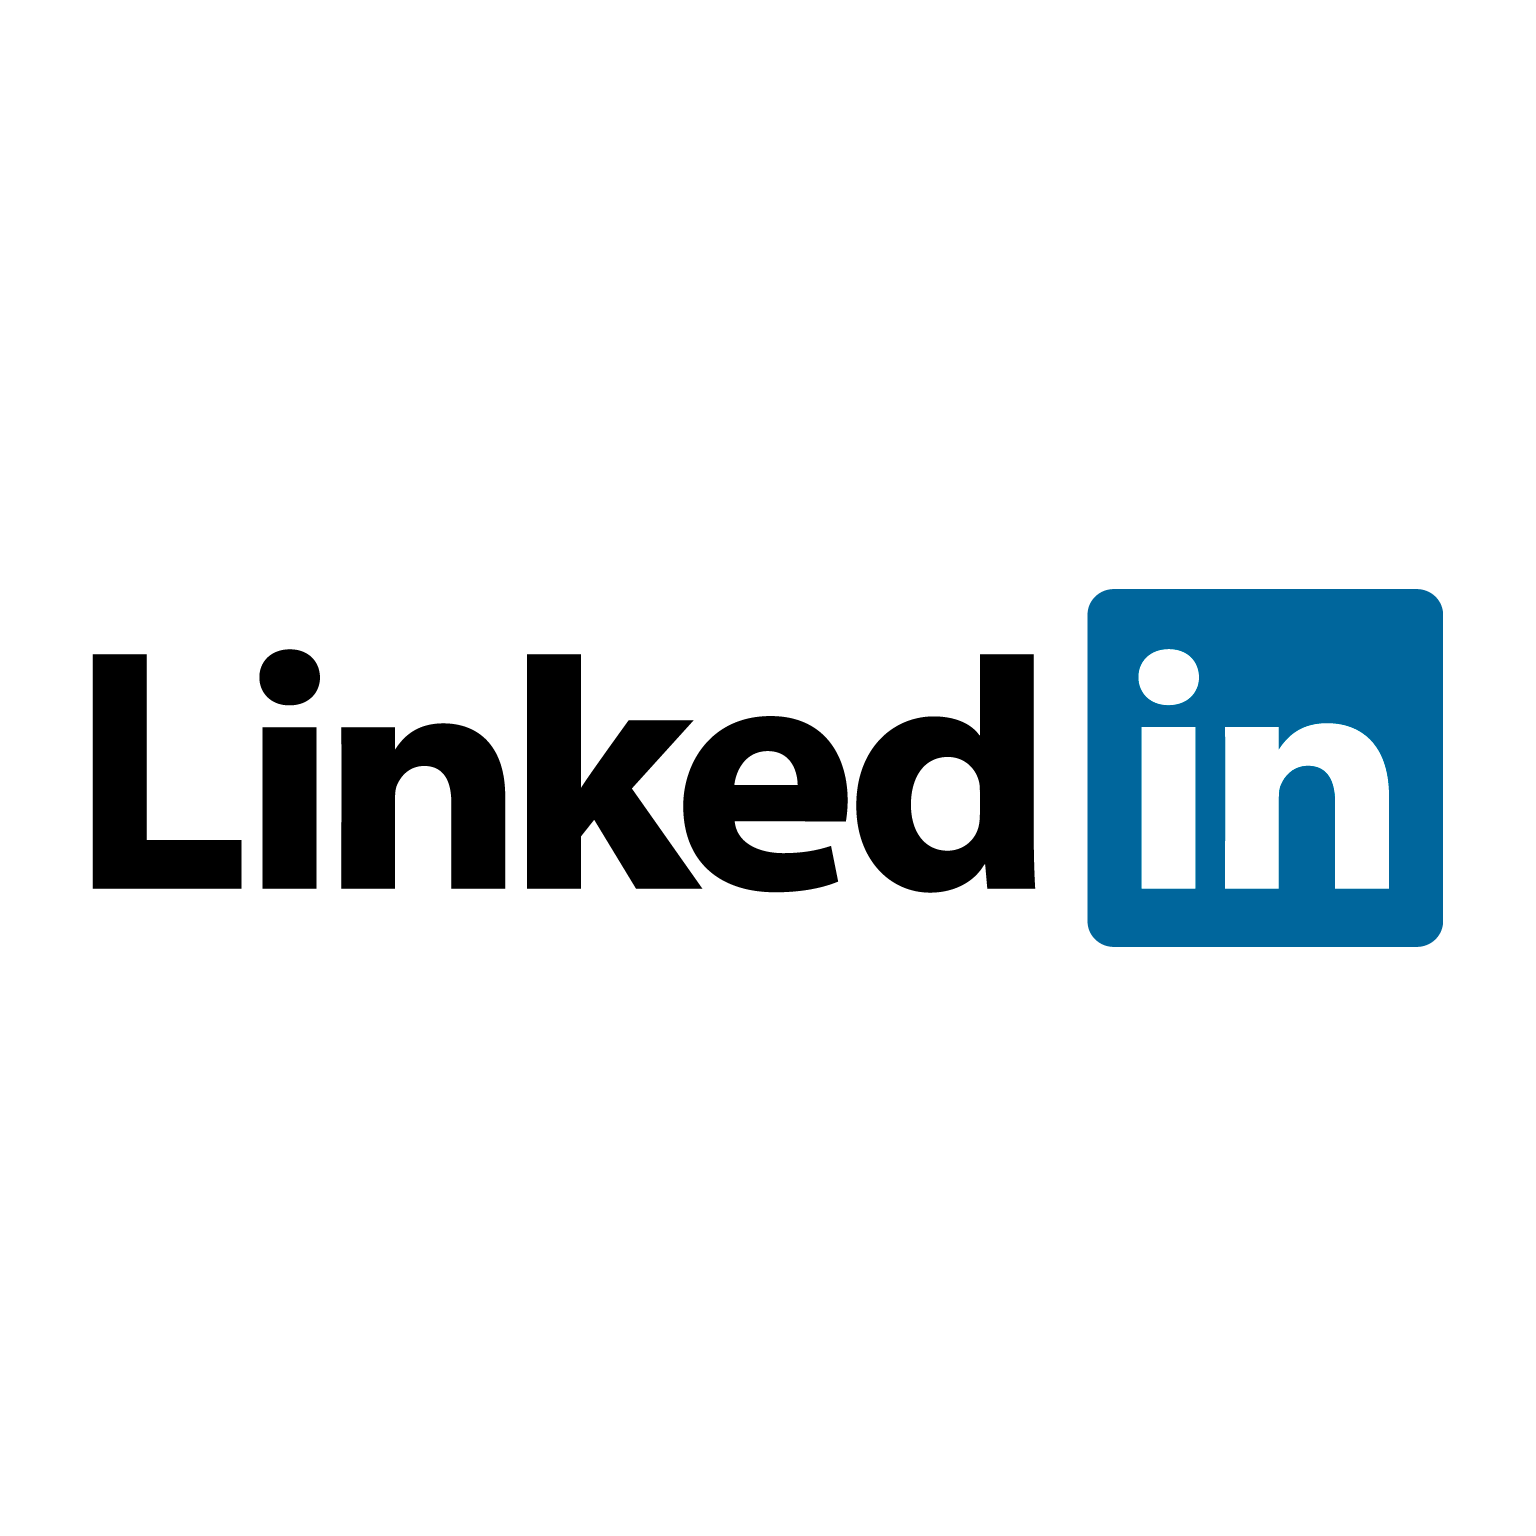 How to Add a Certificate on Linkedin